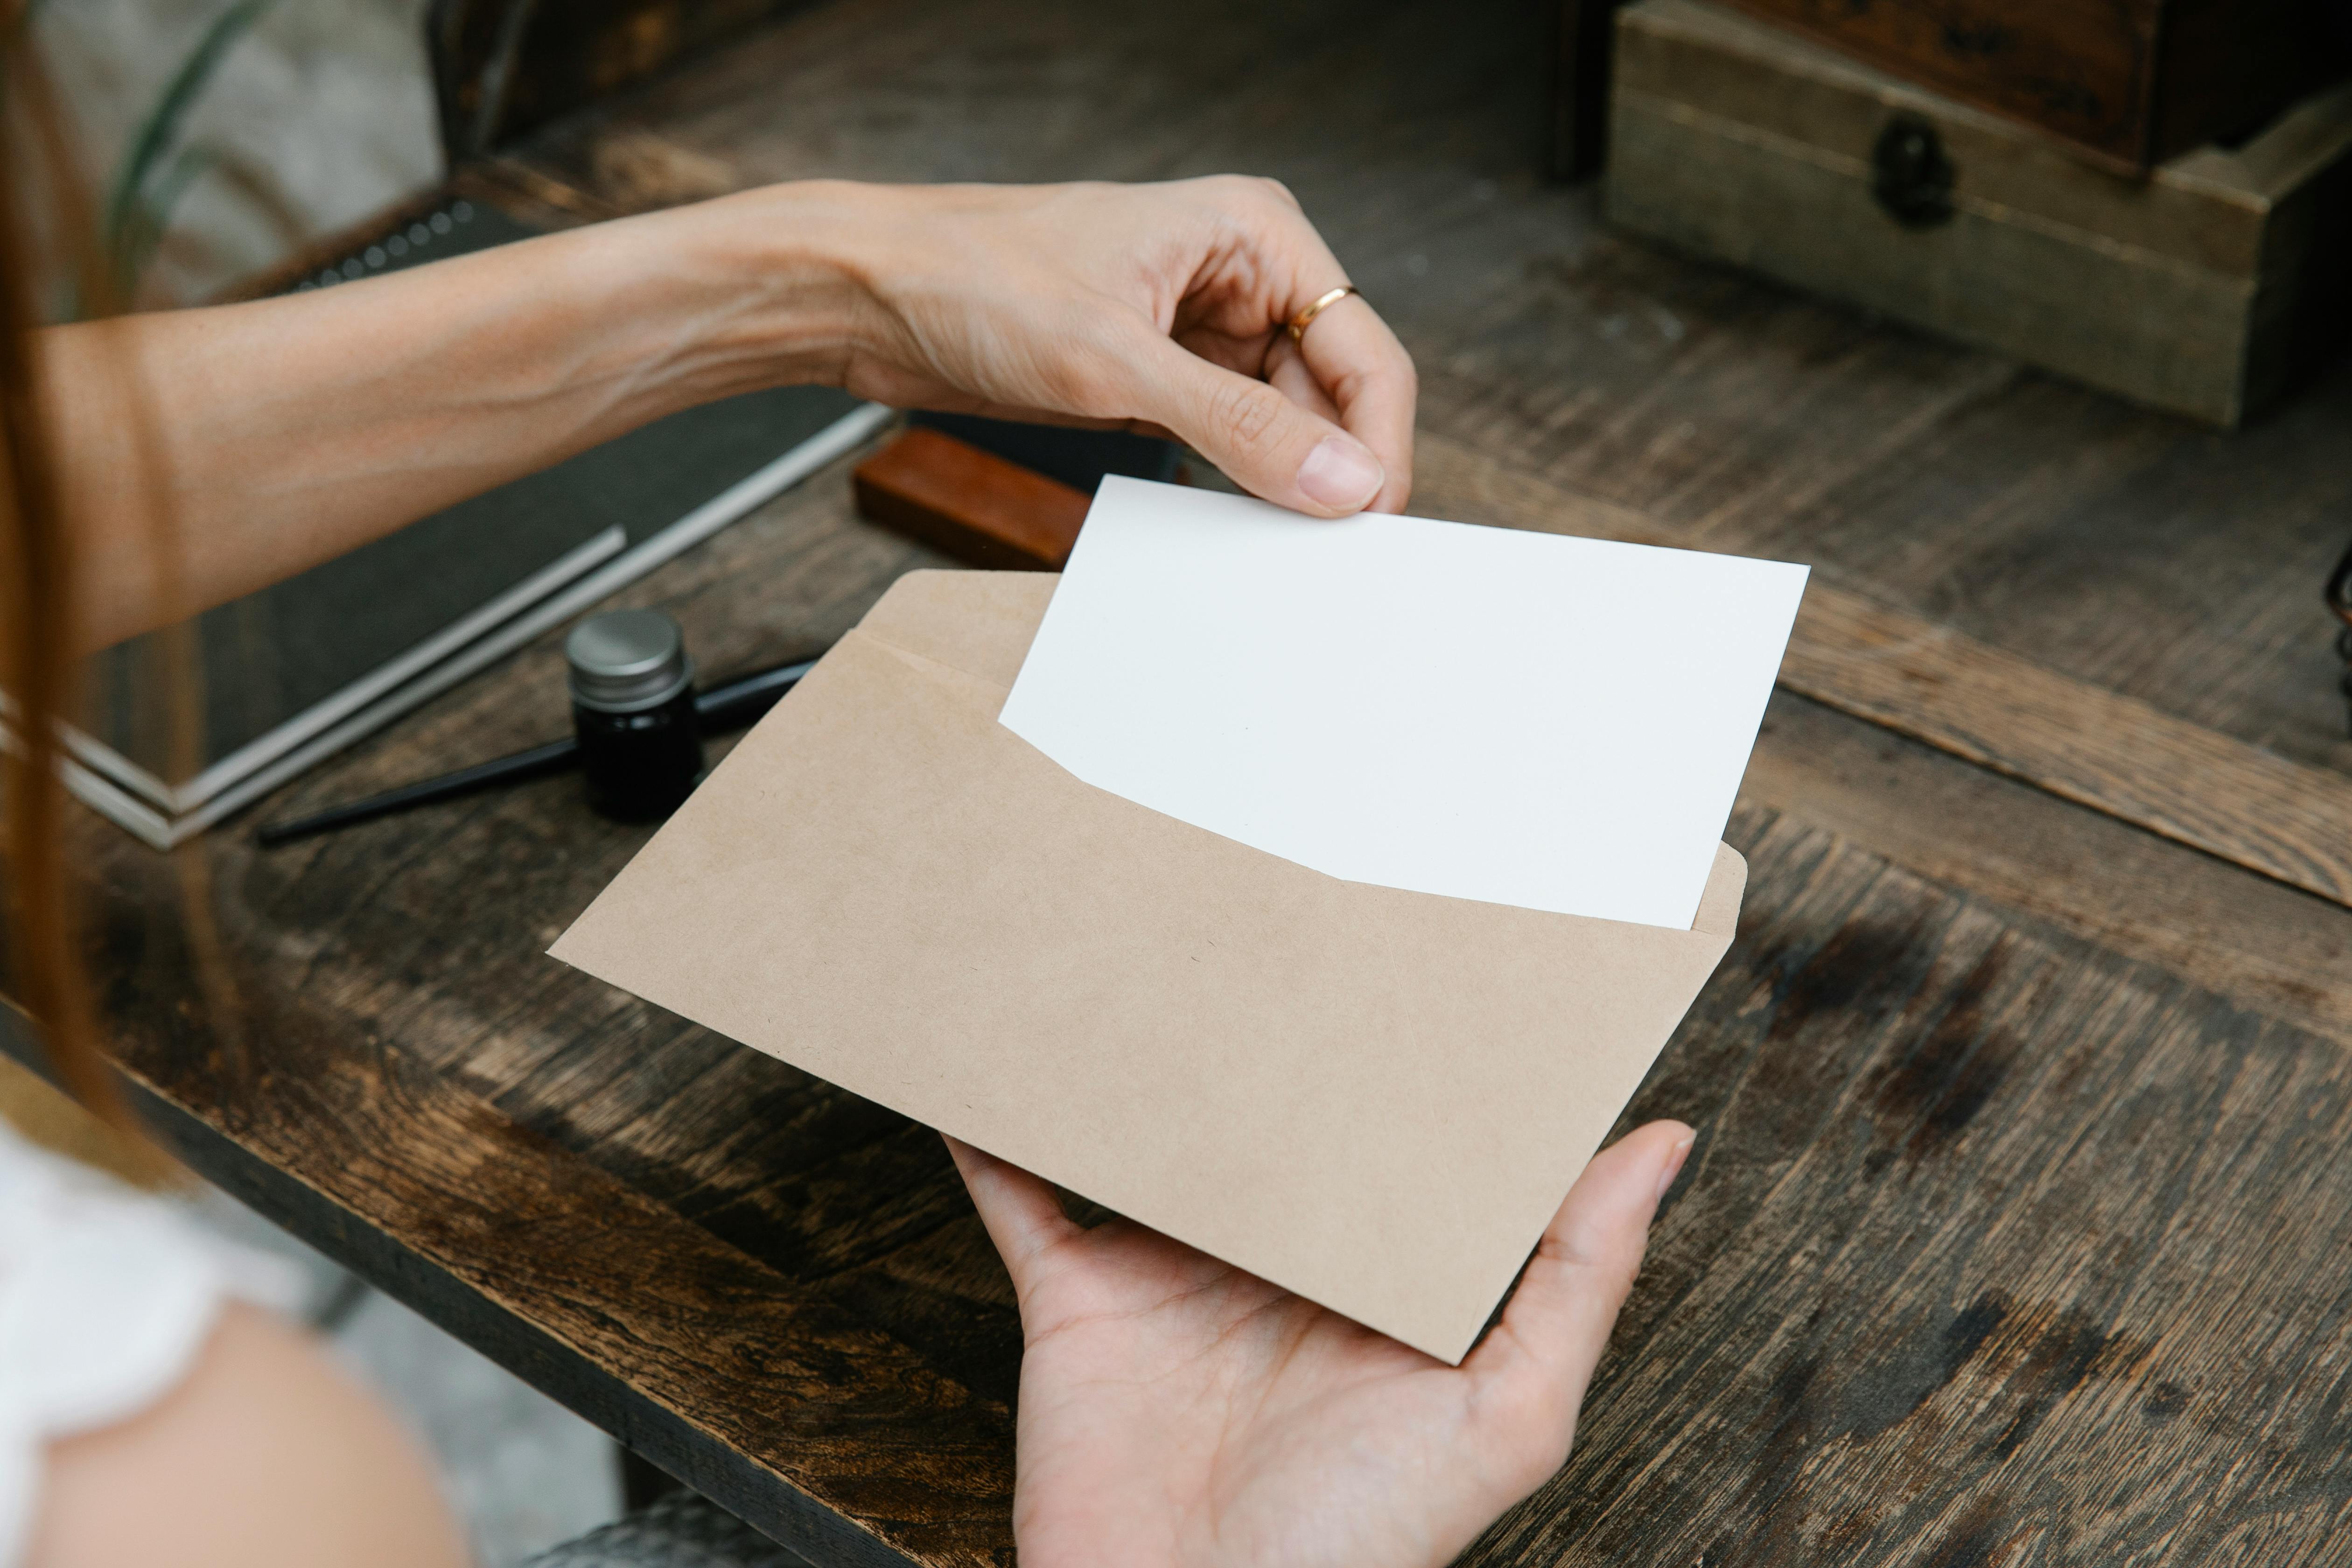 A woman opening an envelope to read a letter | Source: Pexels